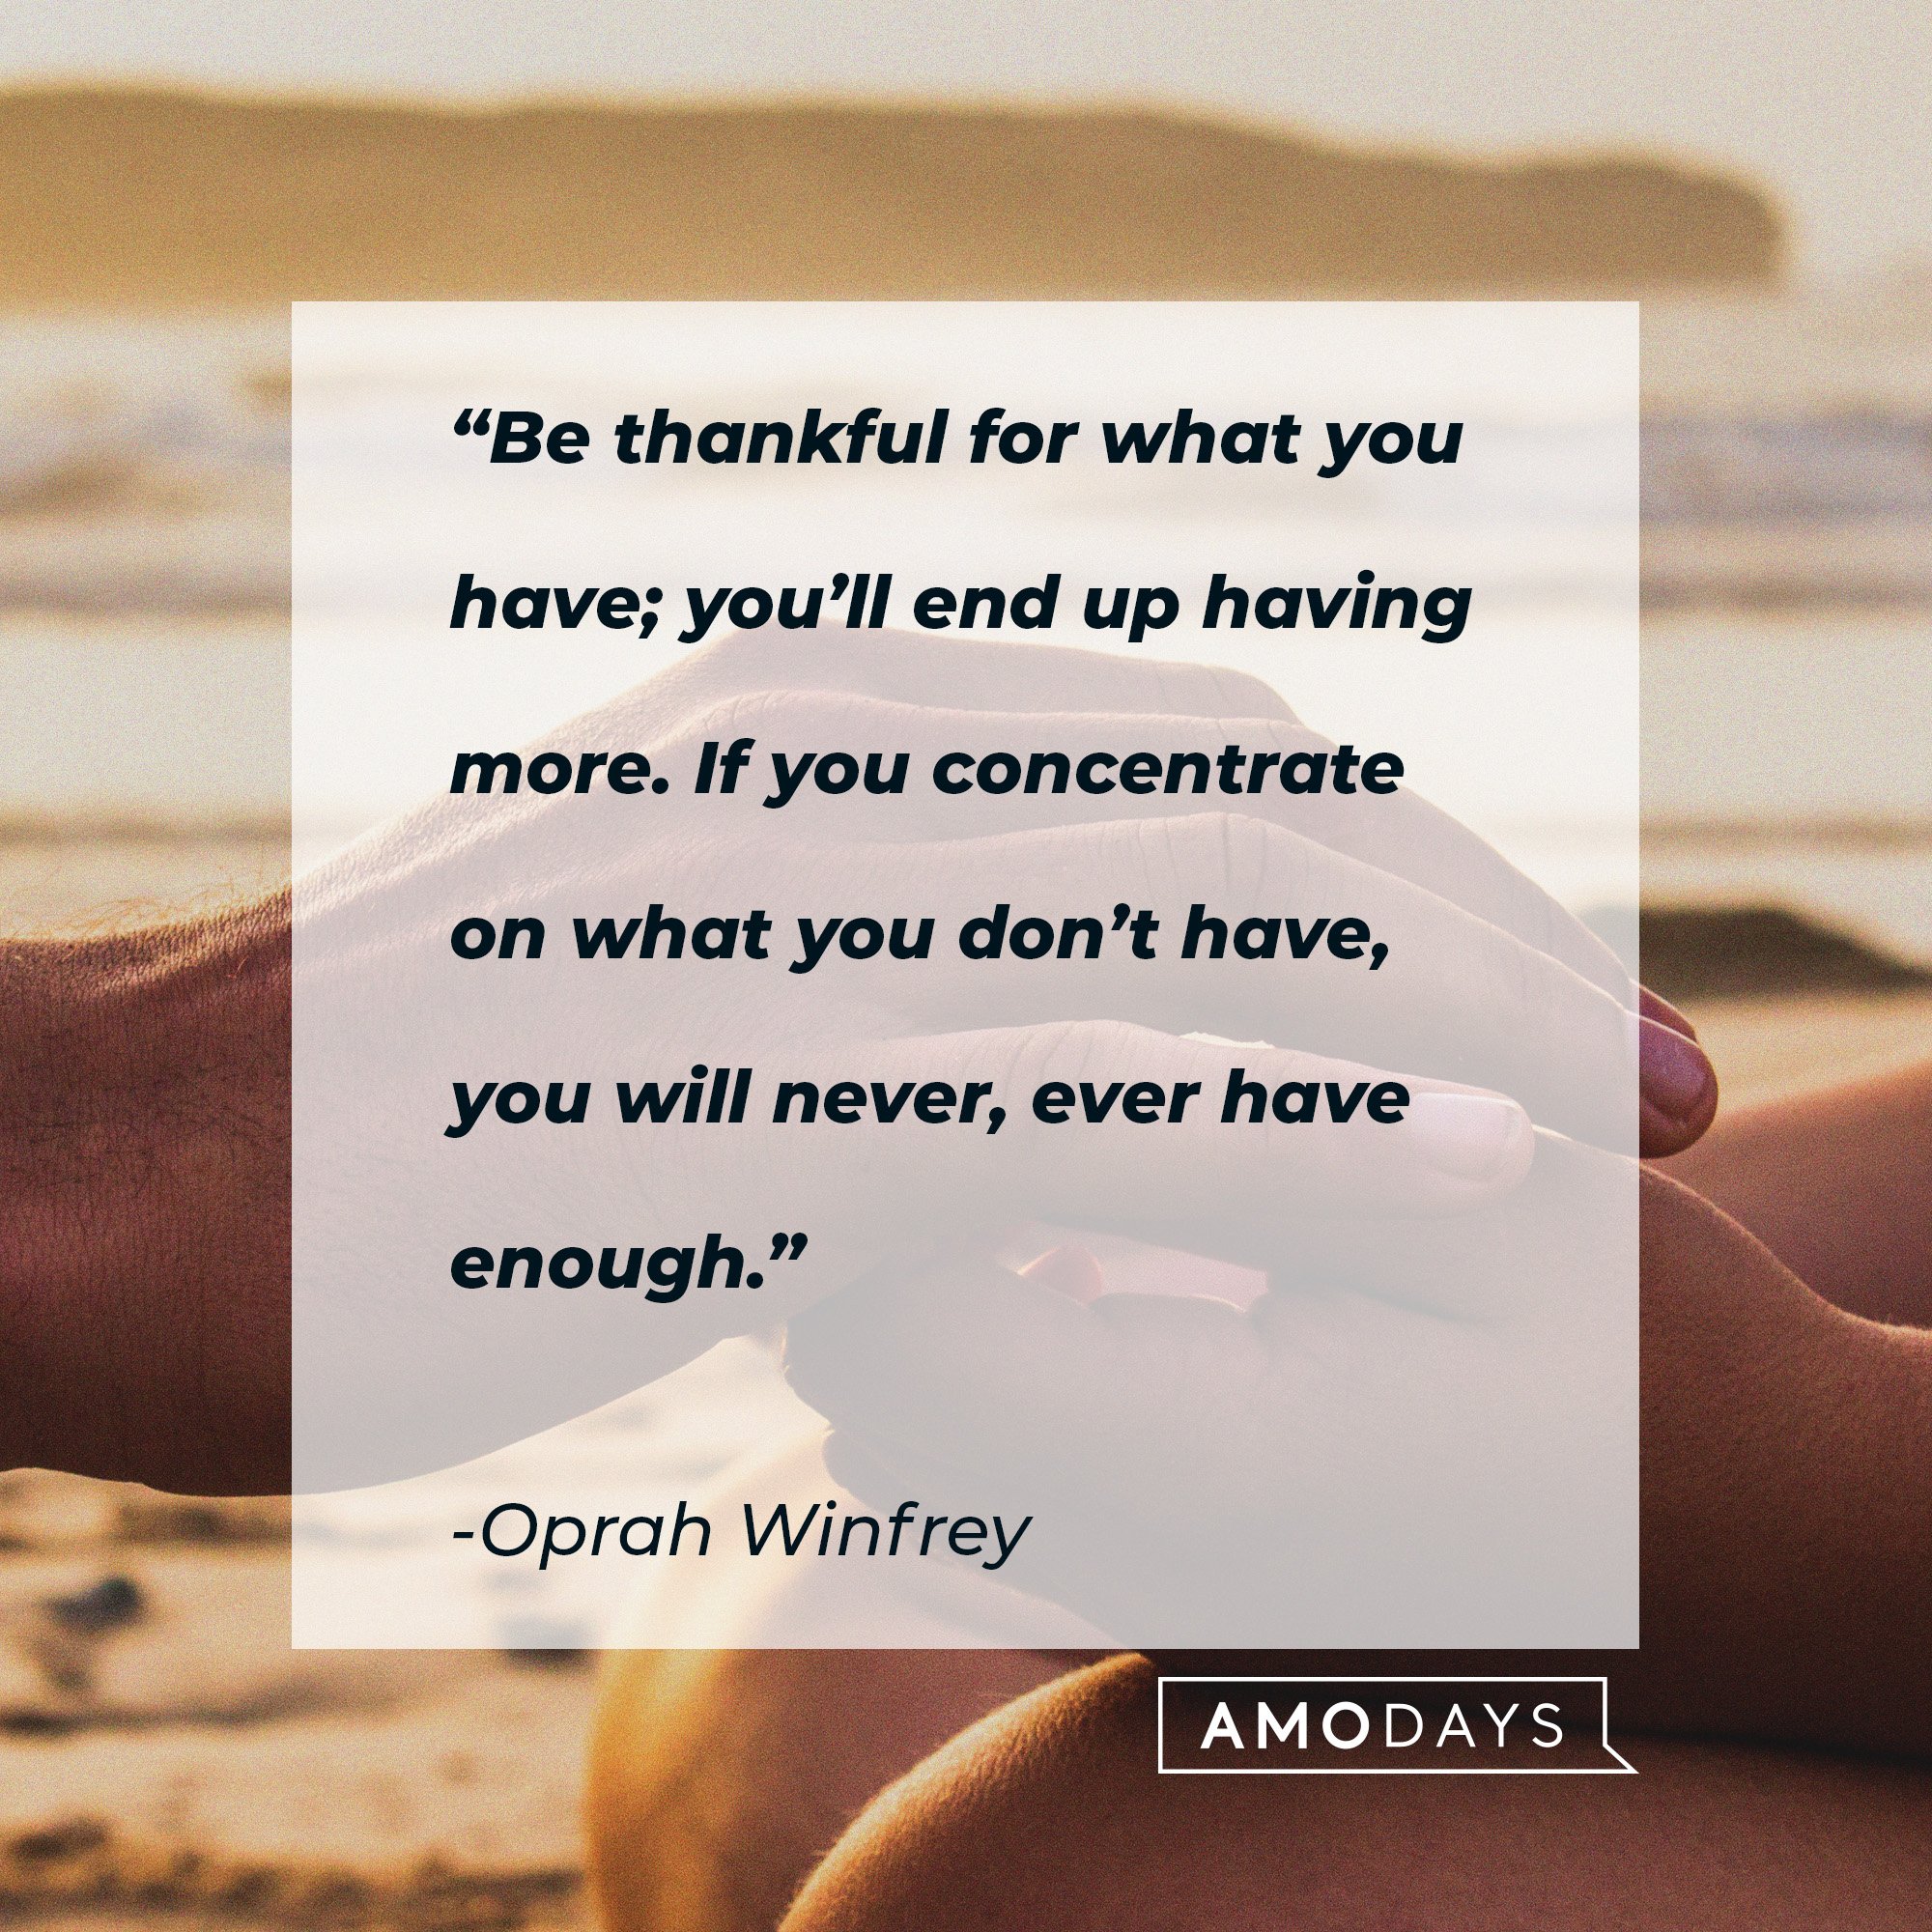  Oprah Winfrey's quote: “Be thankful for what you have; you’ll end up having more. If you concentrate on what you don’t have, you will never, ever have enough.” | Image: AmoDays